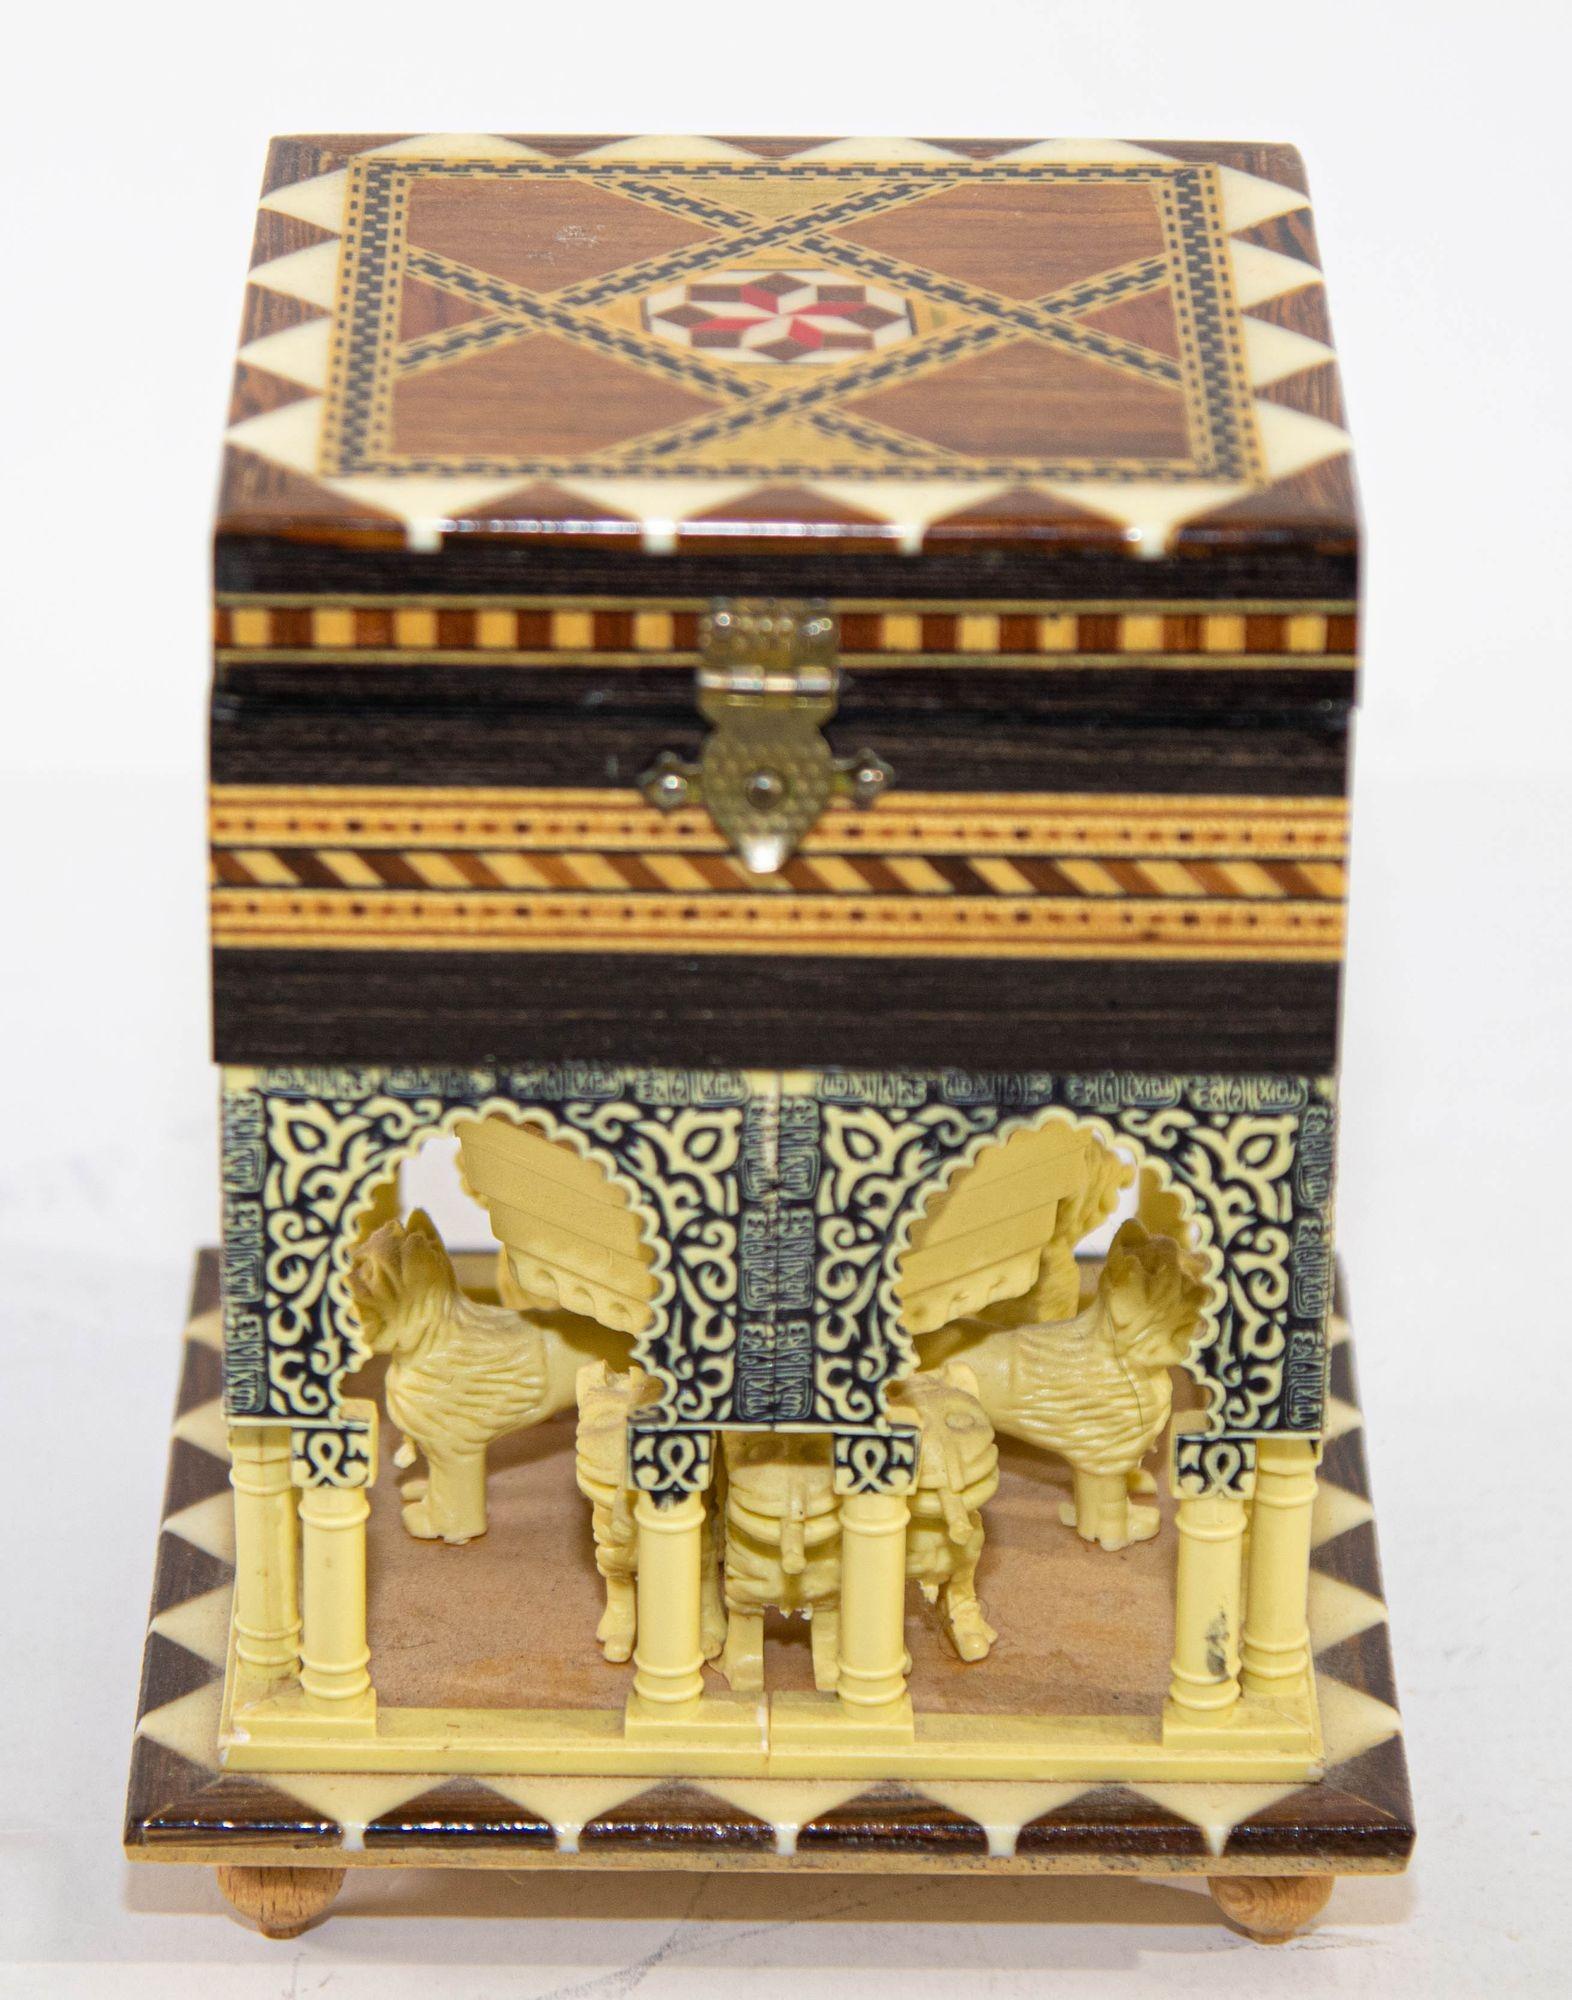 Handmade music box by Miguel Laguna, handcrafted in Granada, Spain, the box represent the Alhambra with Moorish arches, the outside is inlay with bone and marquetry, the inside is lined with red velvet.
The Moorish architectural elements are on all